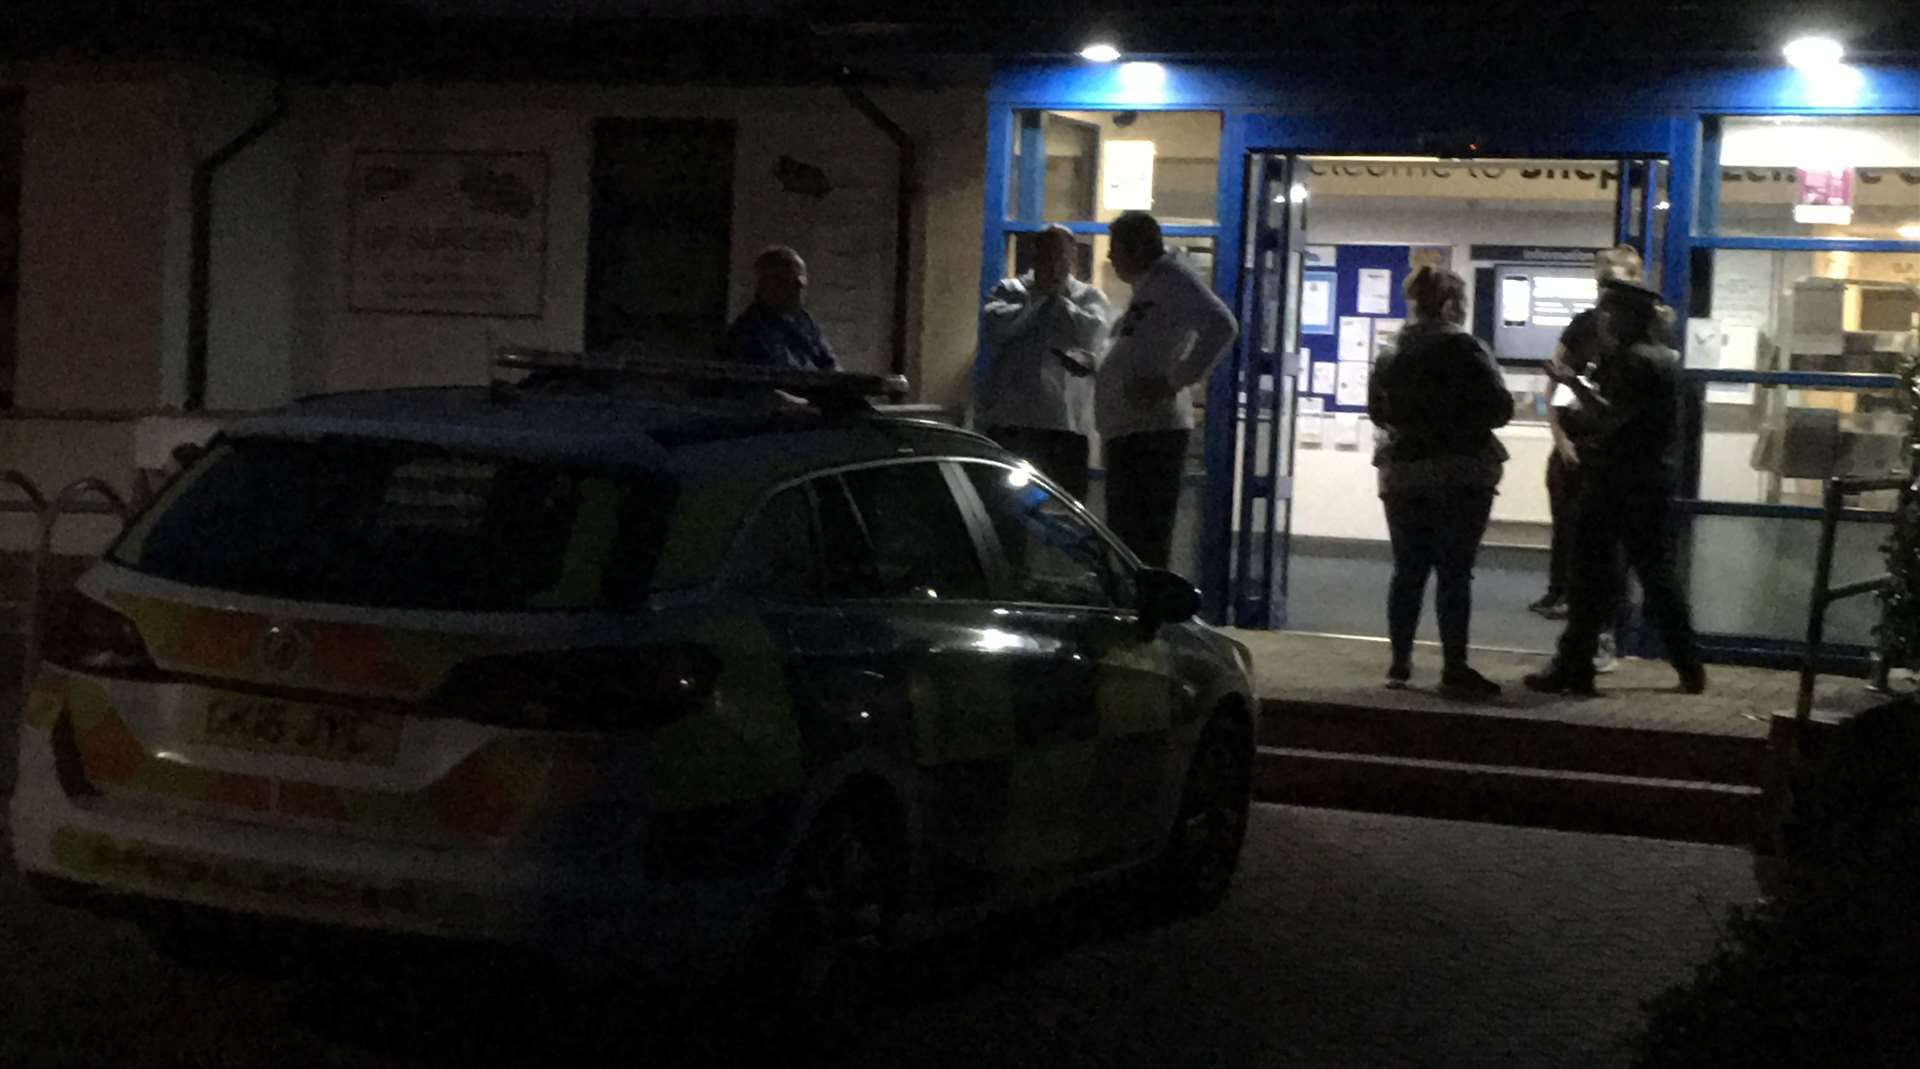 Police at the Sheppey Leisure Complex, off Royal Road, Sheerness